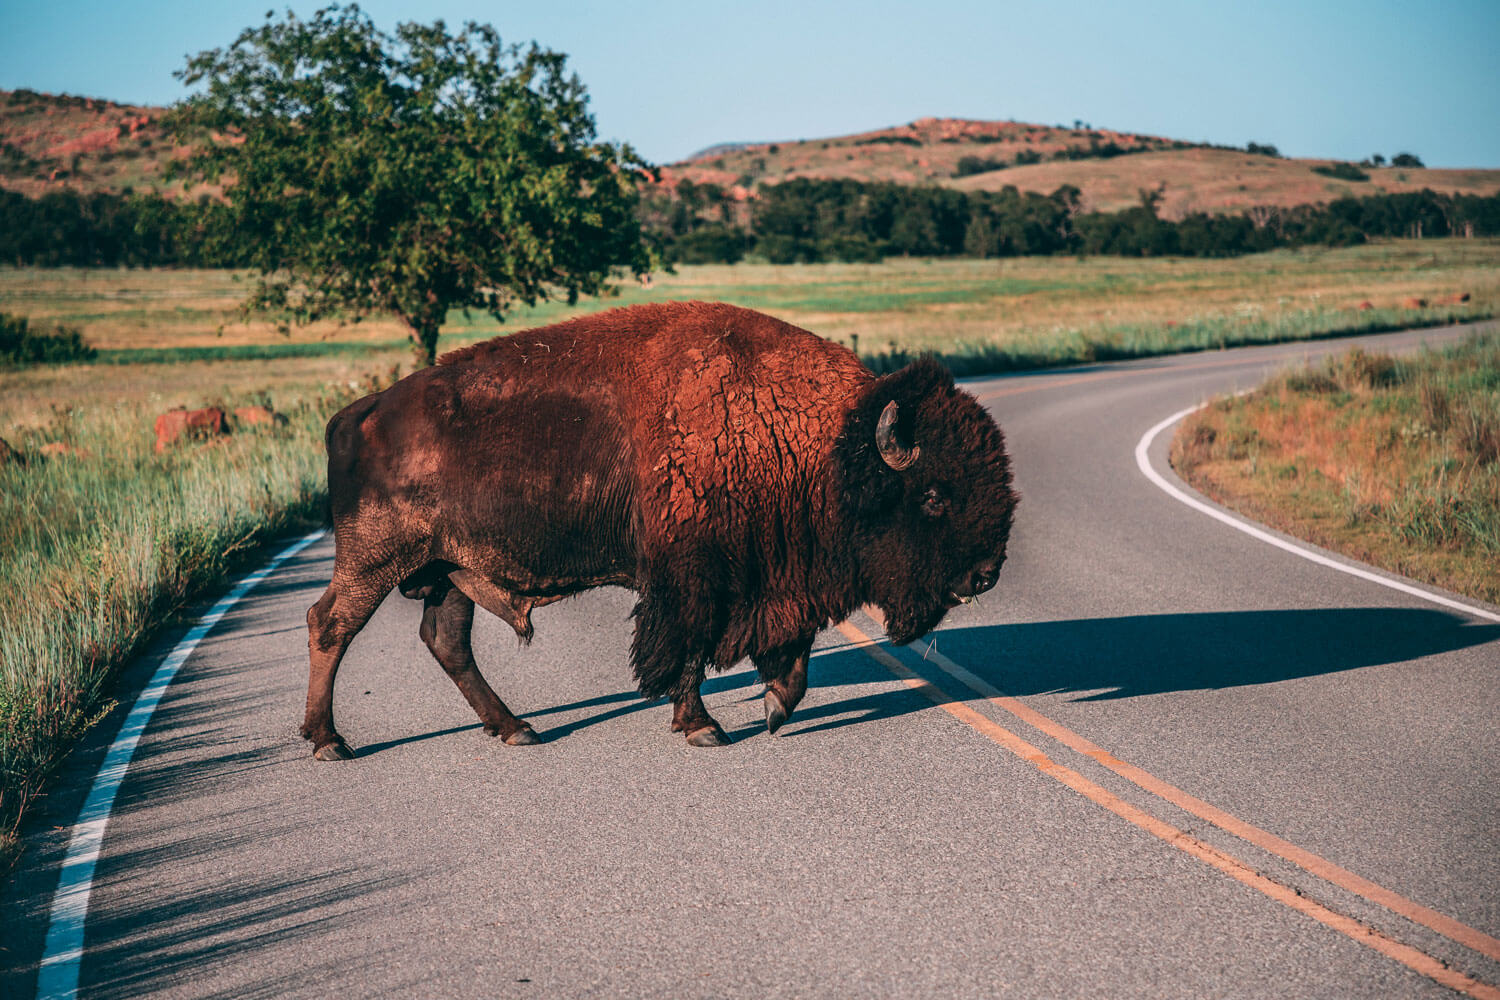 A large bison crosses a sunny road on a grassy plain in Oklahoma